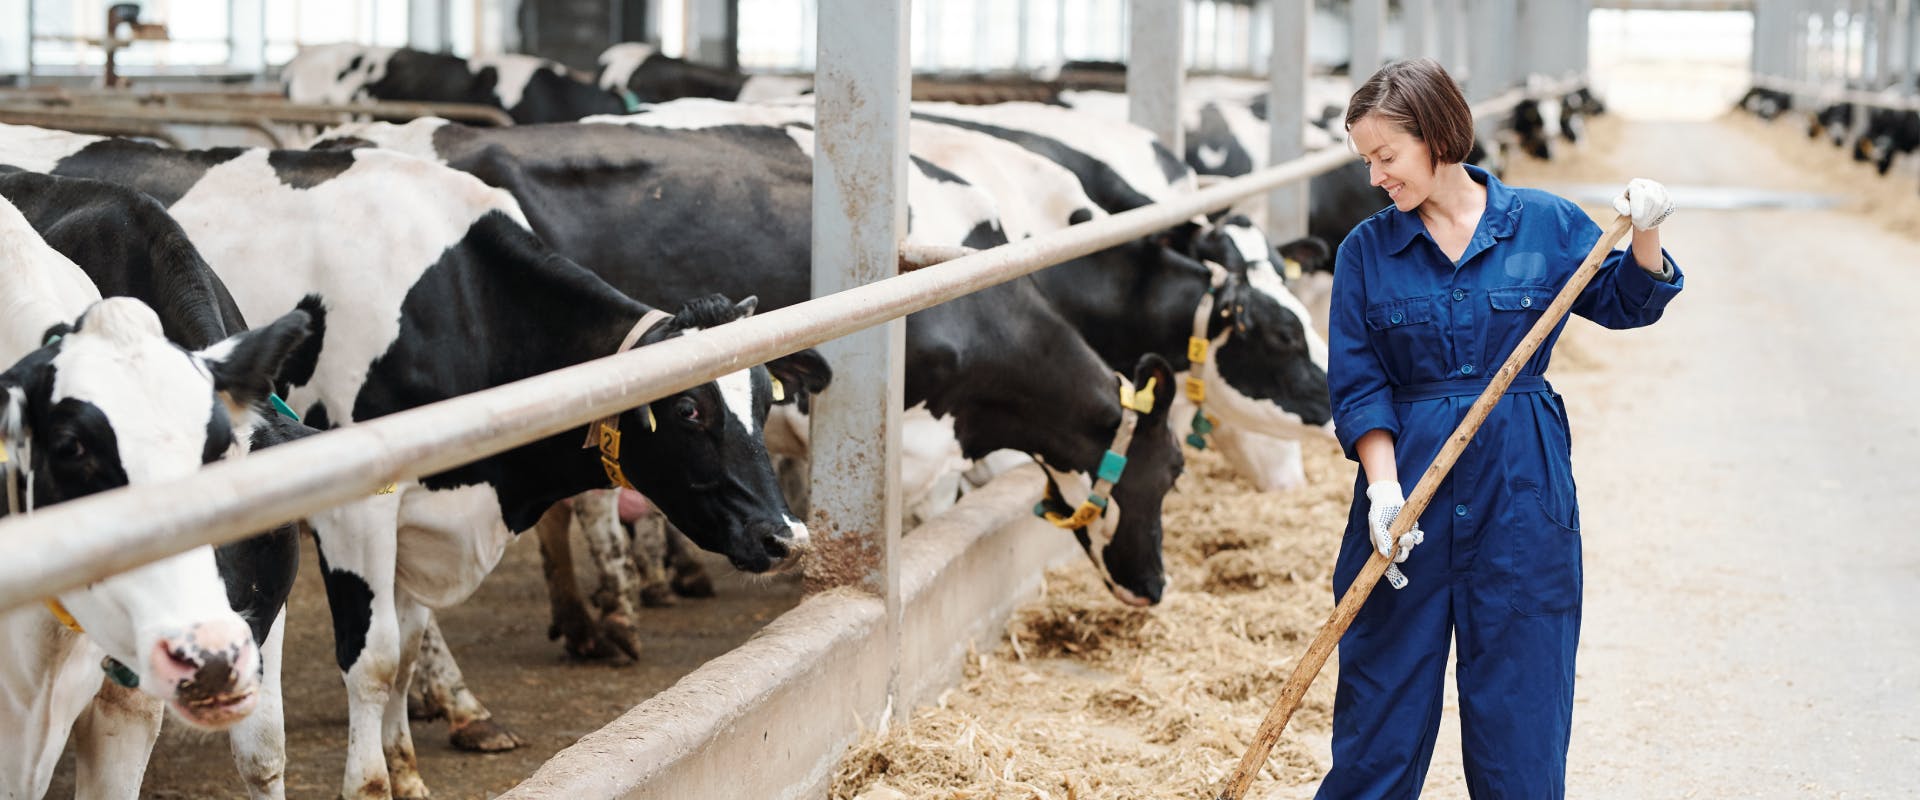 a farm sitter in blue overalls mucking out a cow barn with lots of black and white cows behind a metal pole